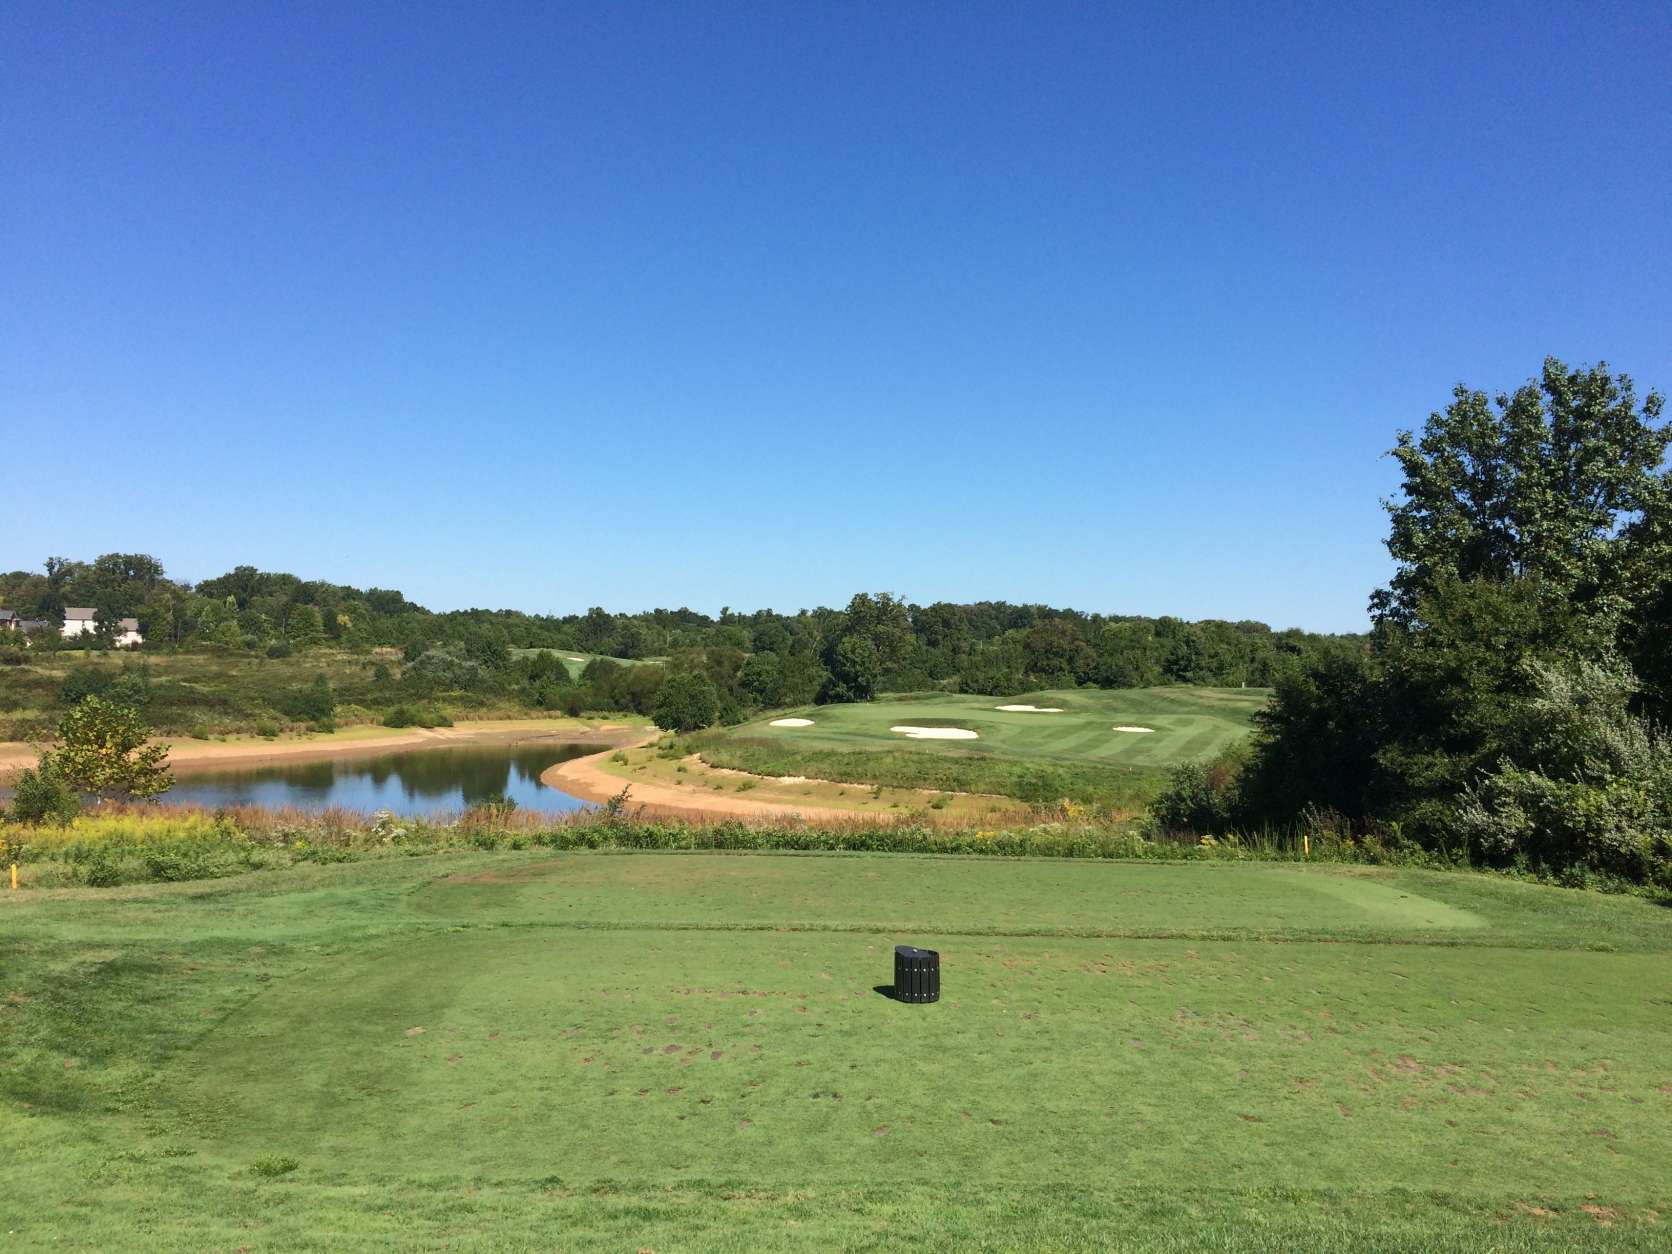 Laurel Hill Golf Club provides a scenic, high-end public course on historic land. (WTOP/Noah Frank)